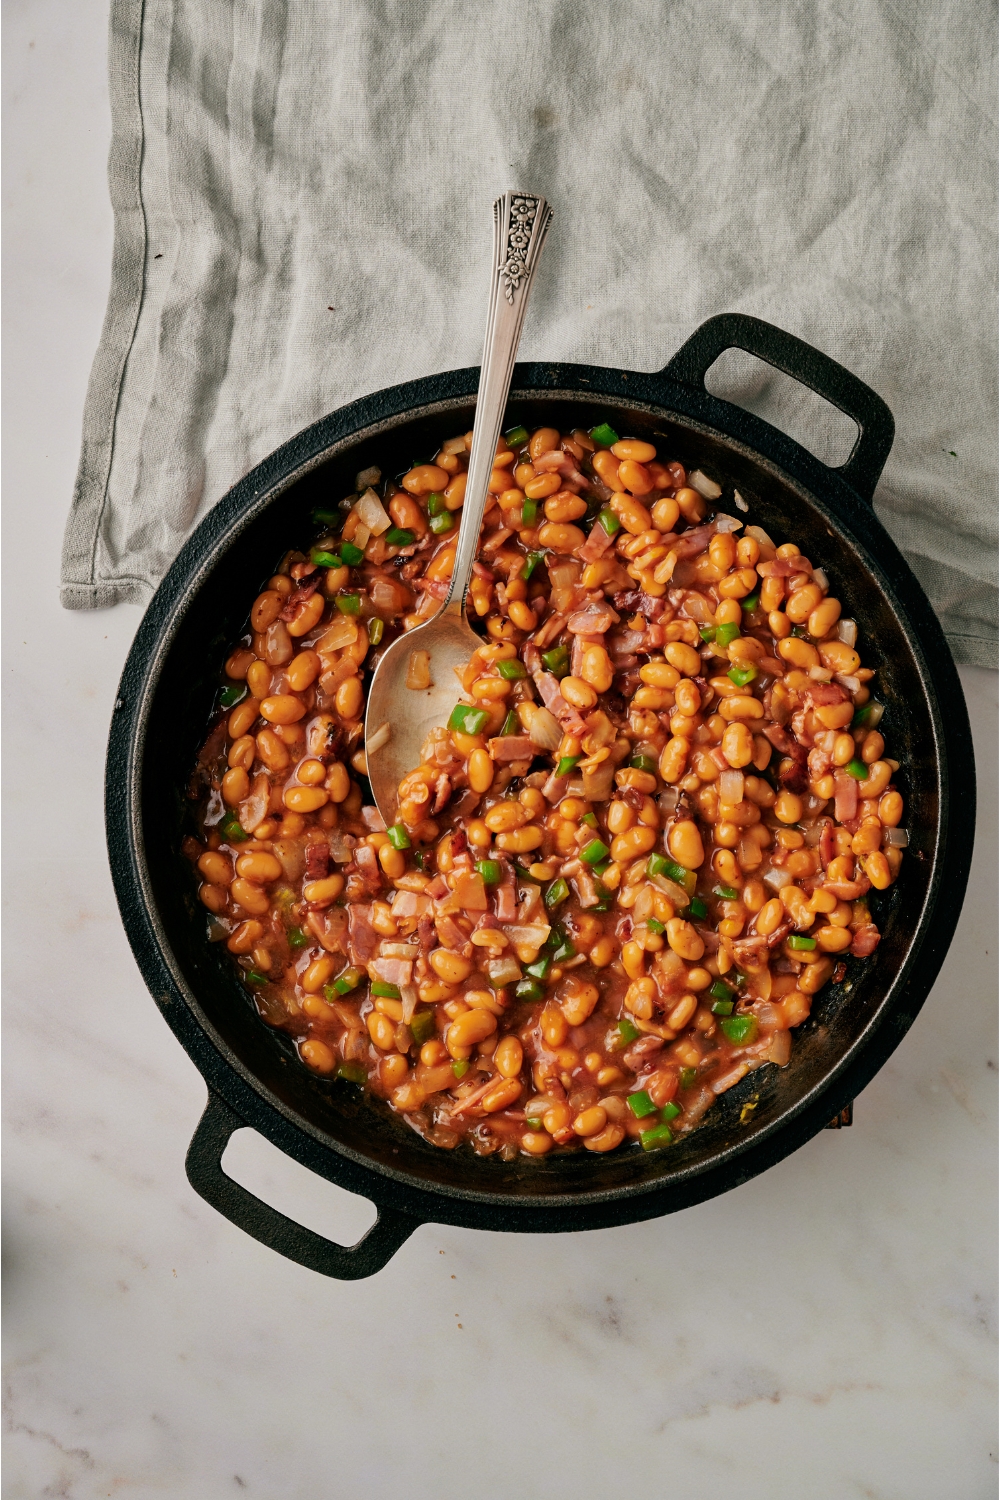 A black skillet filled with canned beans, diced bacon, diced green bell pepper, diced onion, and a spoon is in the skillet.